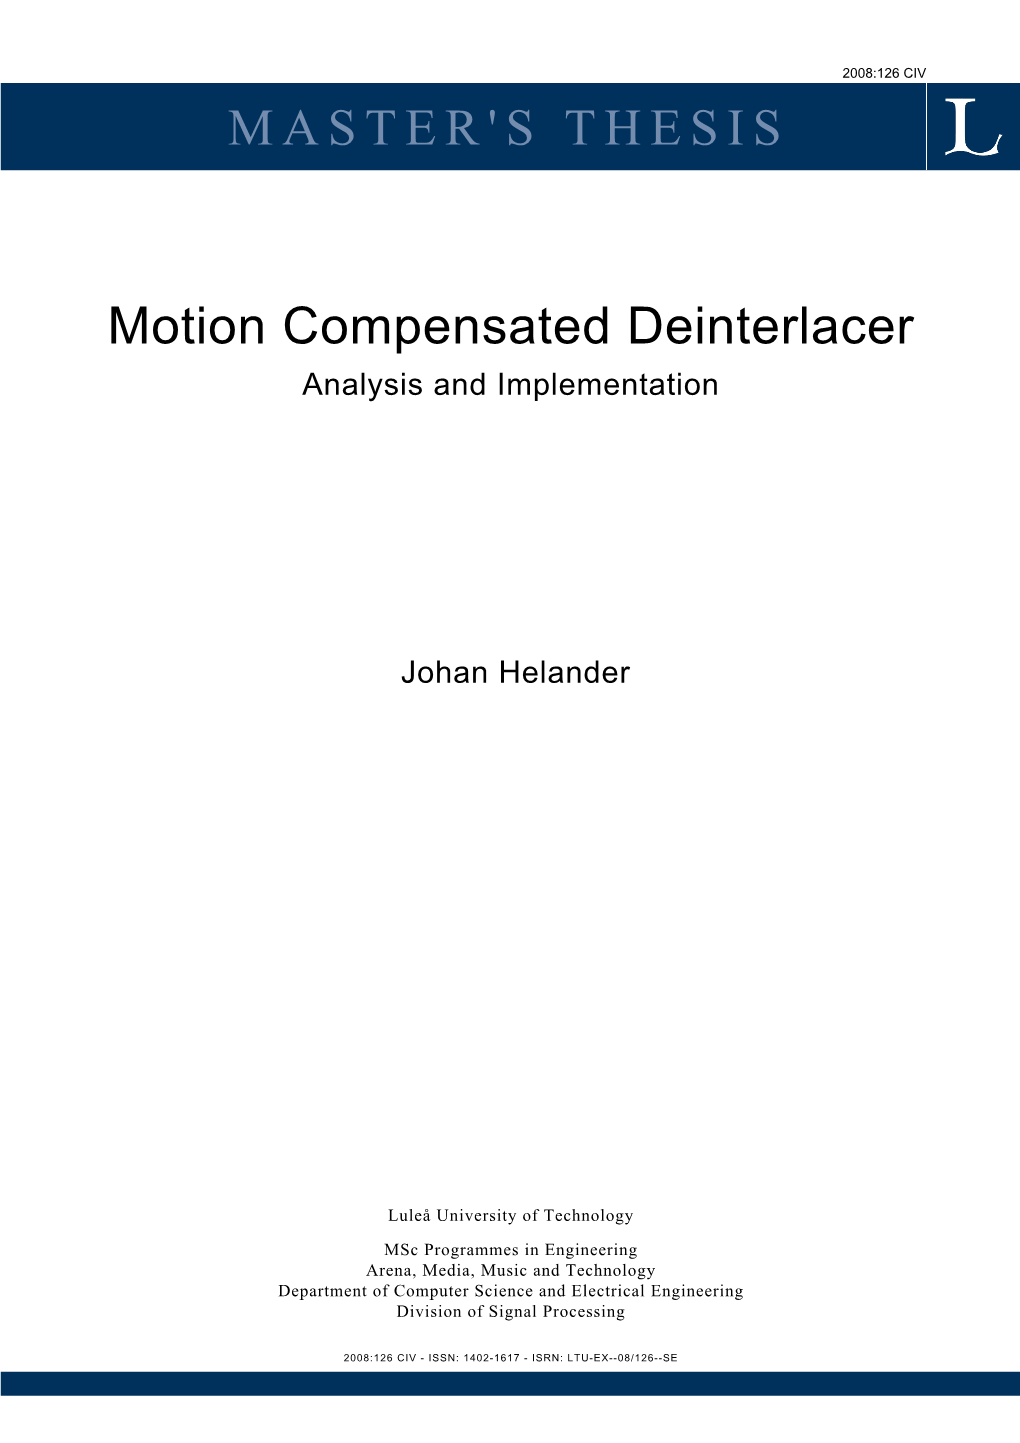 Motion Compensated Deinterlacer Analysis and Implementation